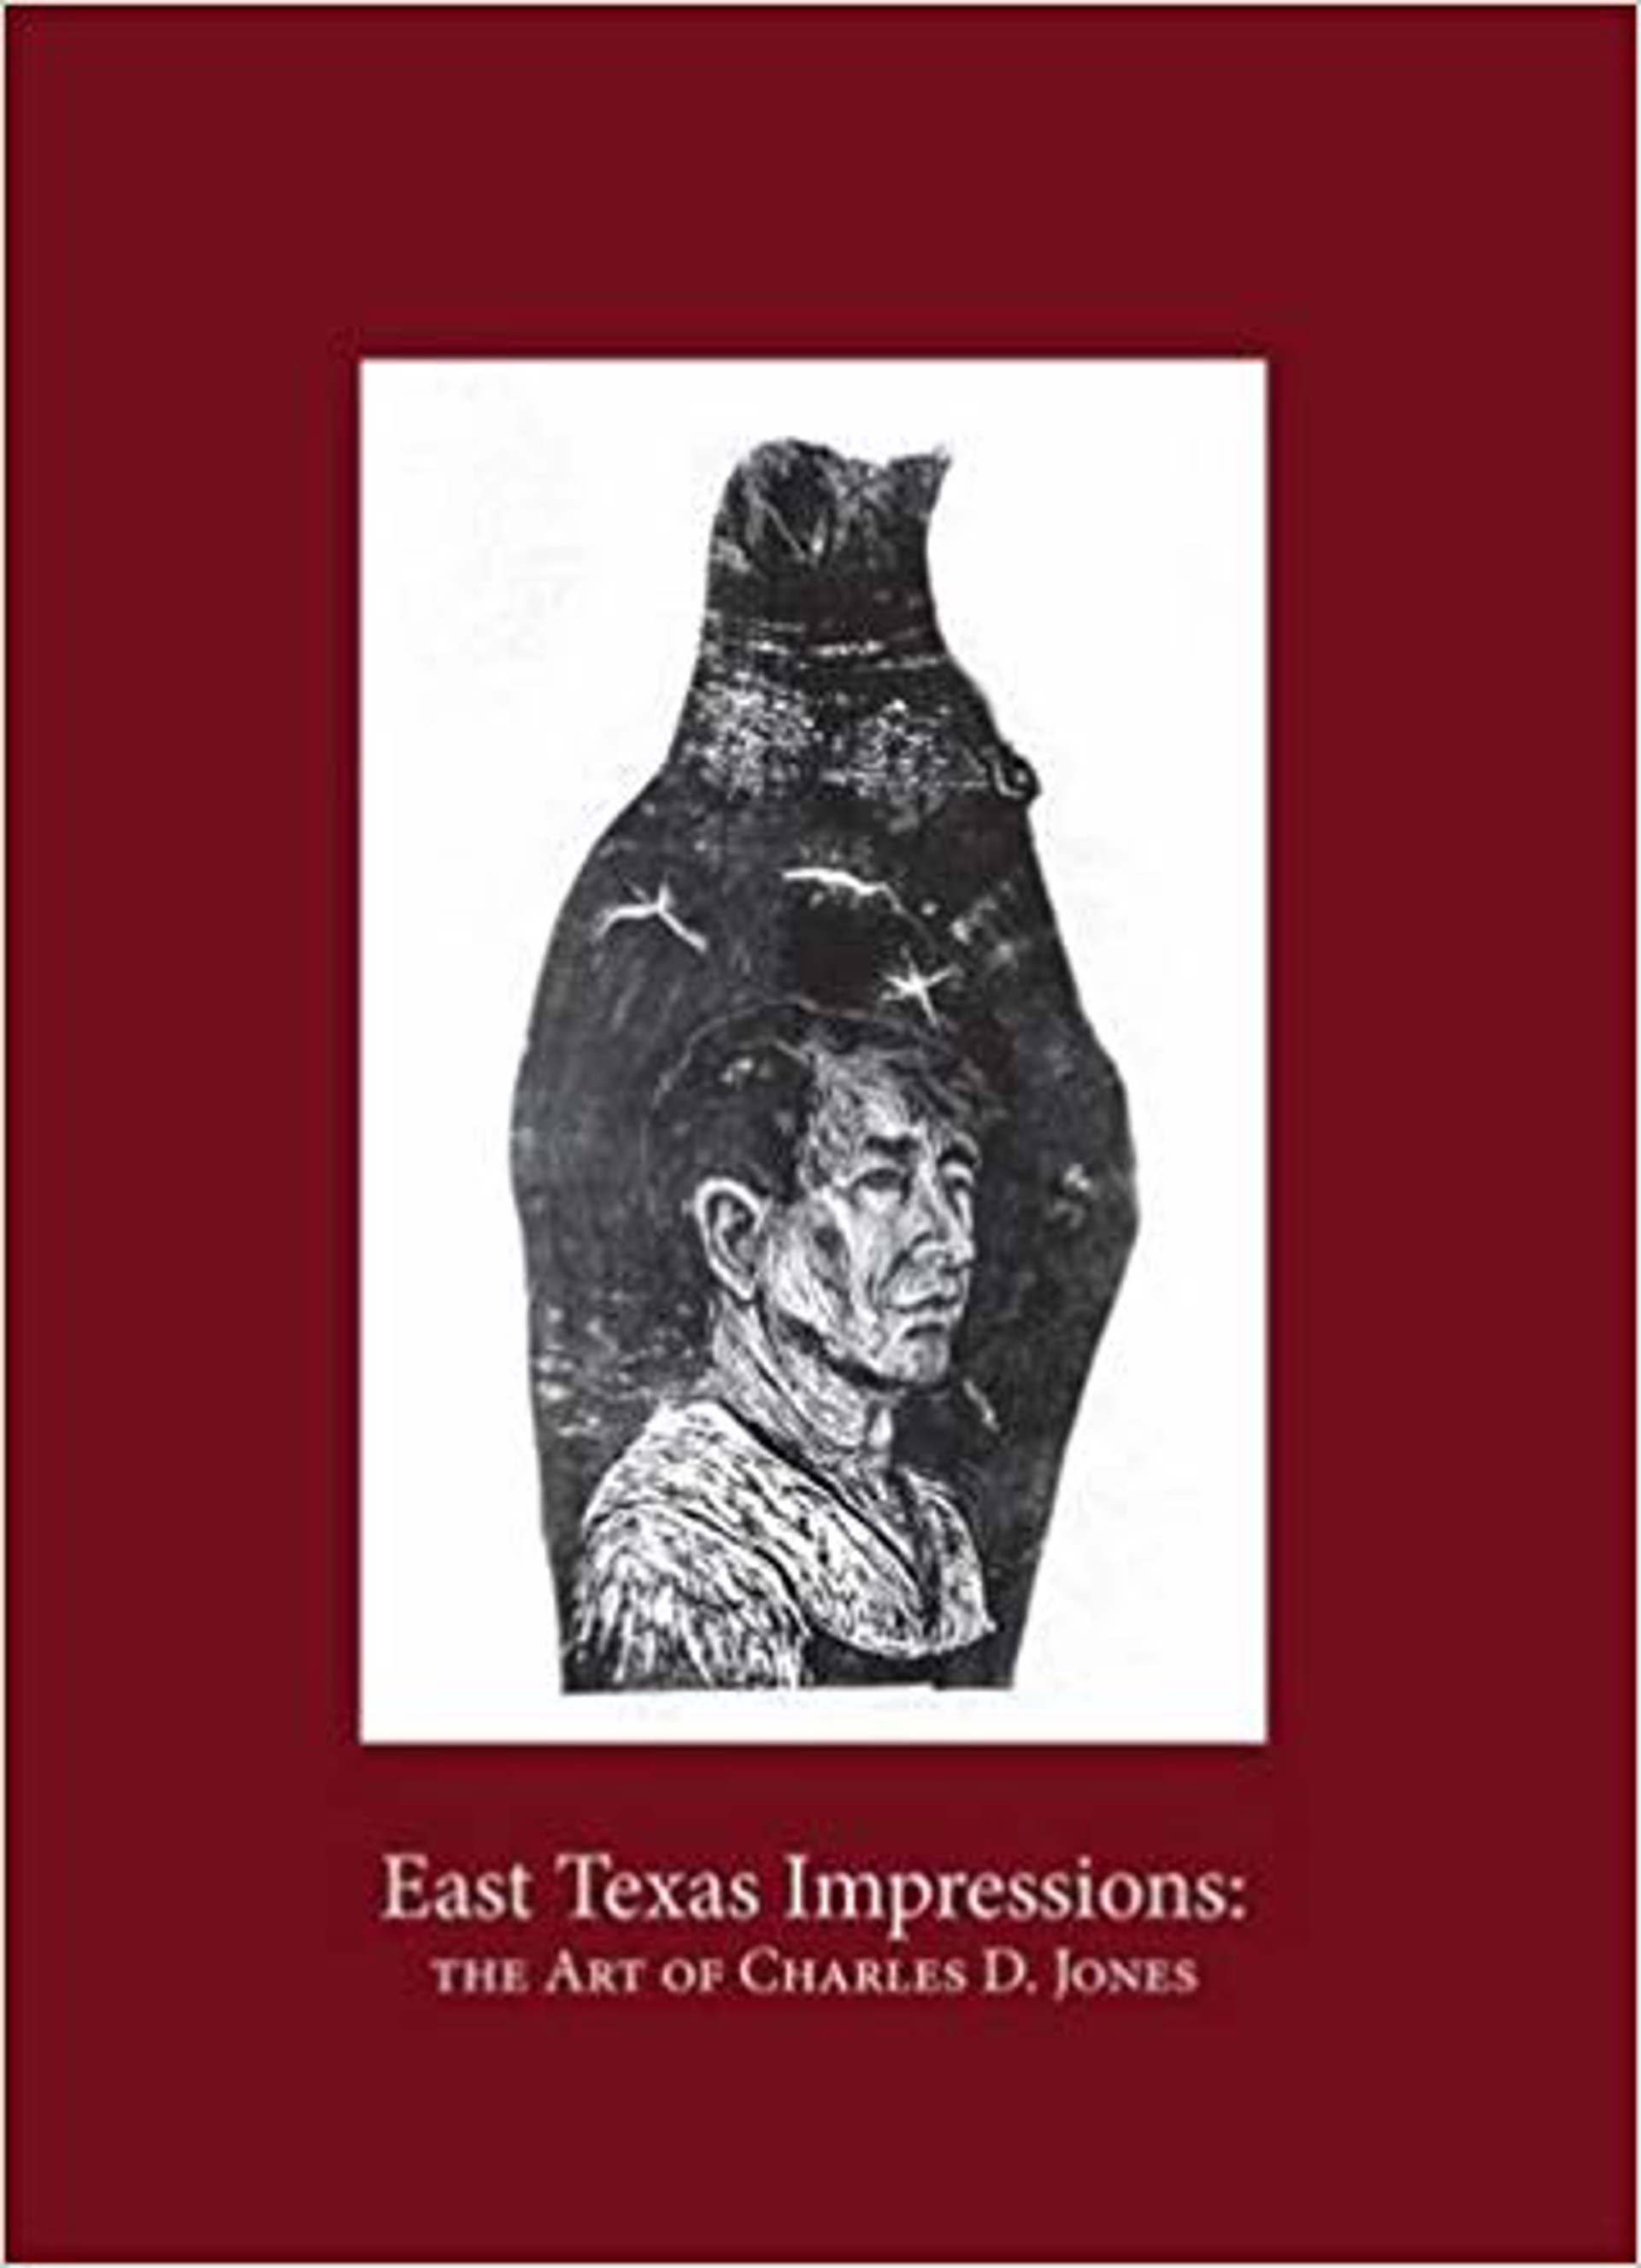 East Texas Impressions | The Art of Charles D. Jones by Publications